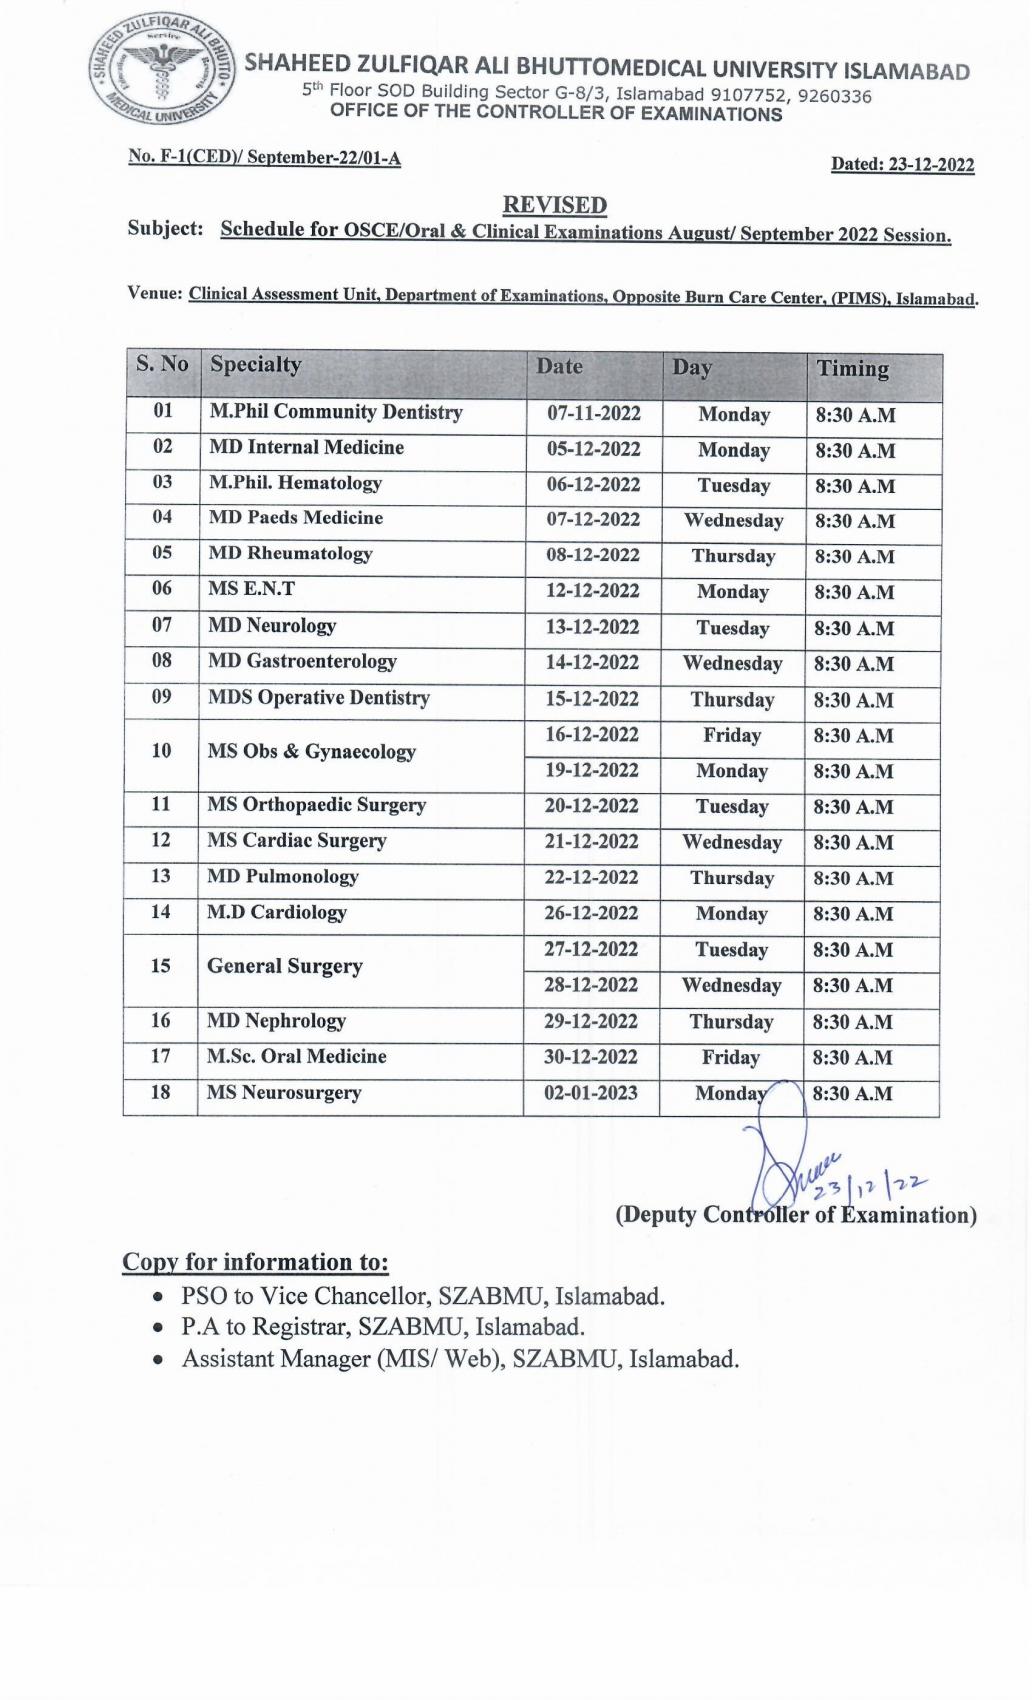 Revised - Schedule for OSCE/Oral & Clinical Examinations August/September 2022 Session